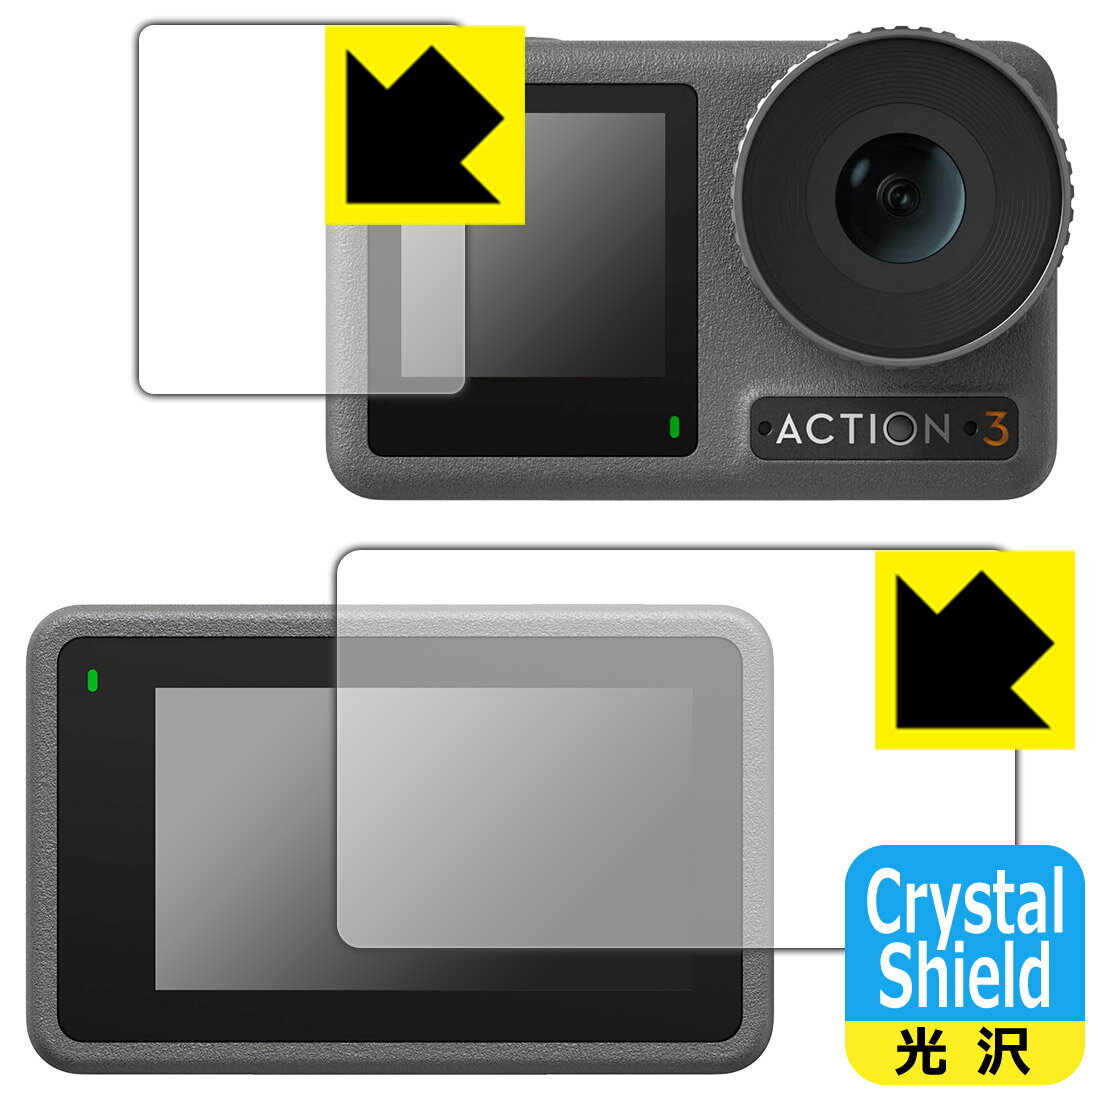 Crystal ShieldyzیtB DJI Osmo Action 3 (Cp/Tup) { А